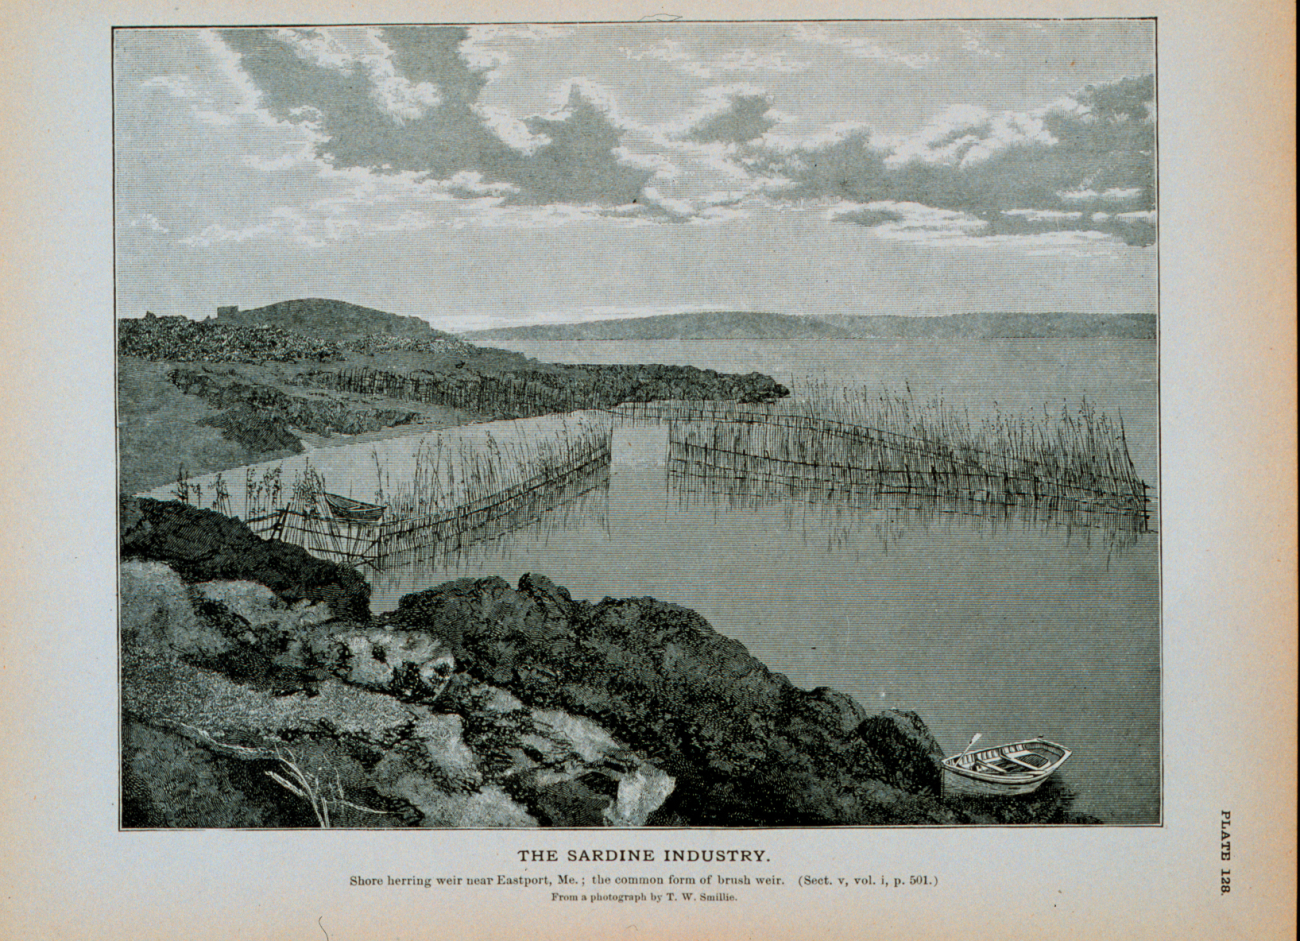 Shore herring weir near Eastport, Maine; the common form of brush weirFrom a photograph by T